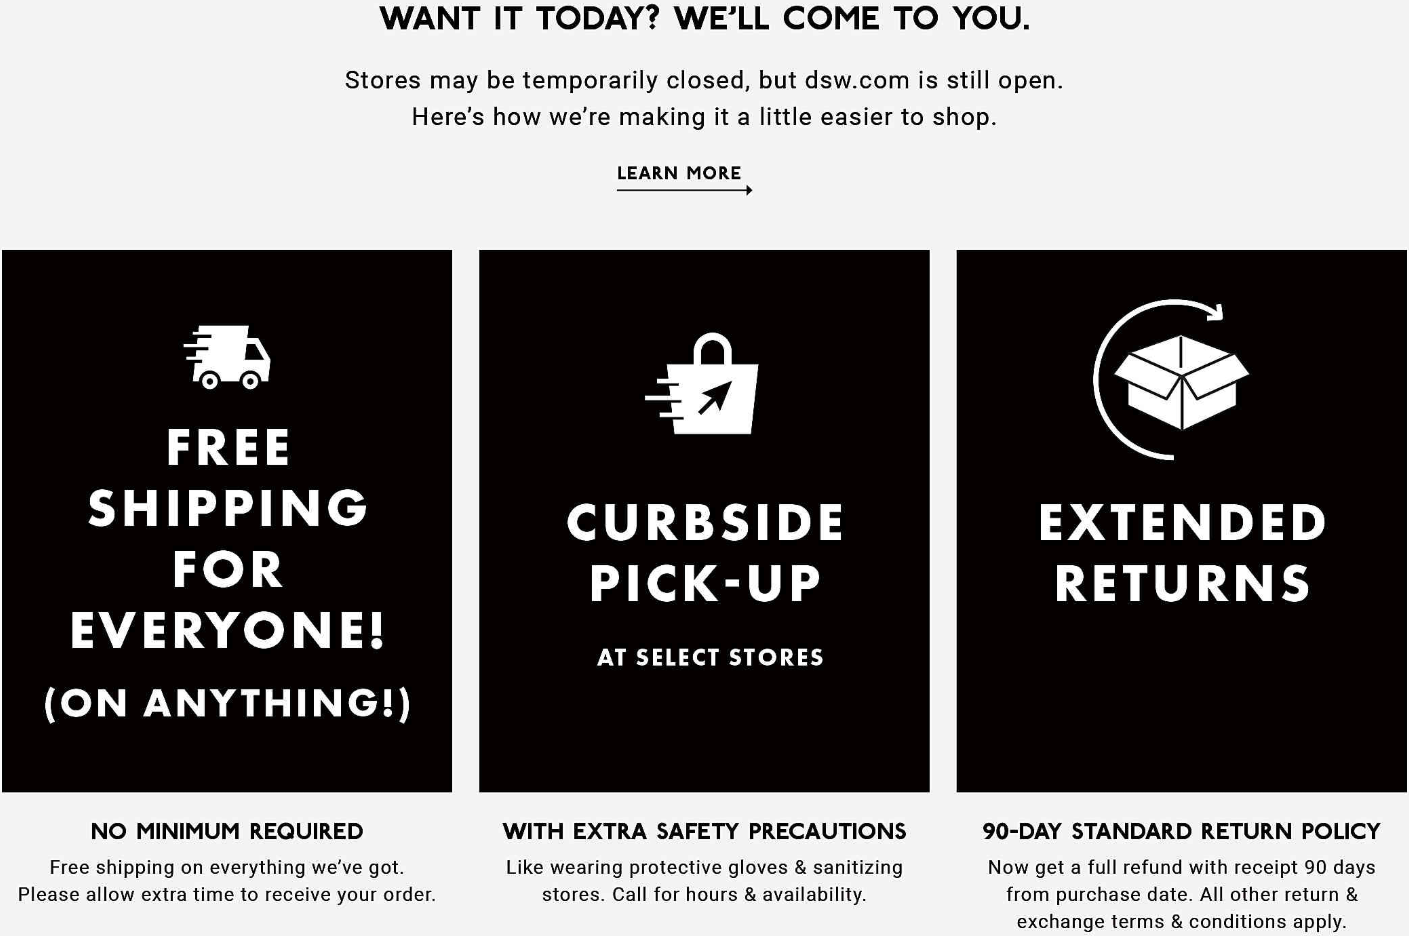 Other than offering free shipping to everyone, DSW also introduced a generous return policy and curbside pick-up to cater to their audience.